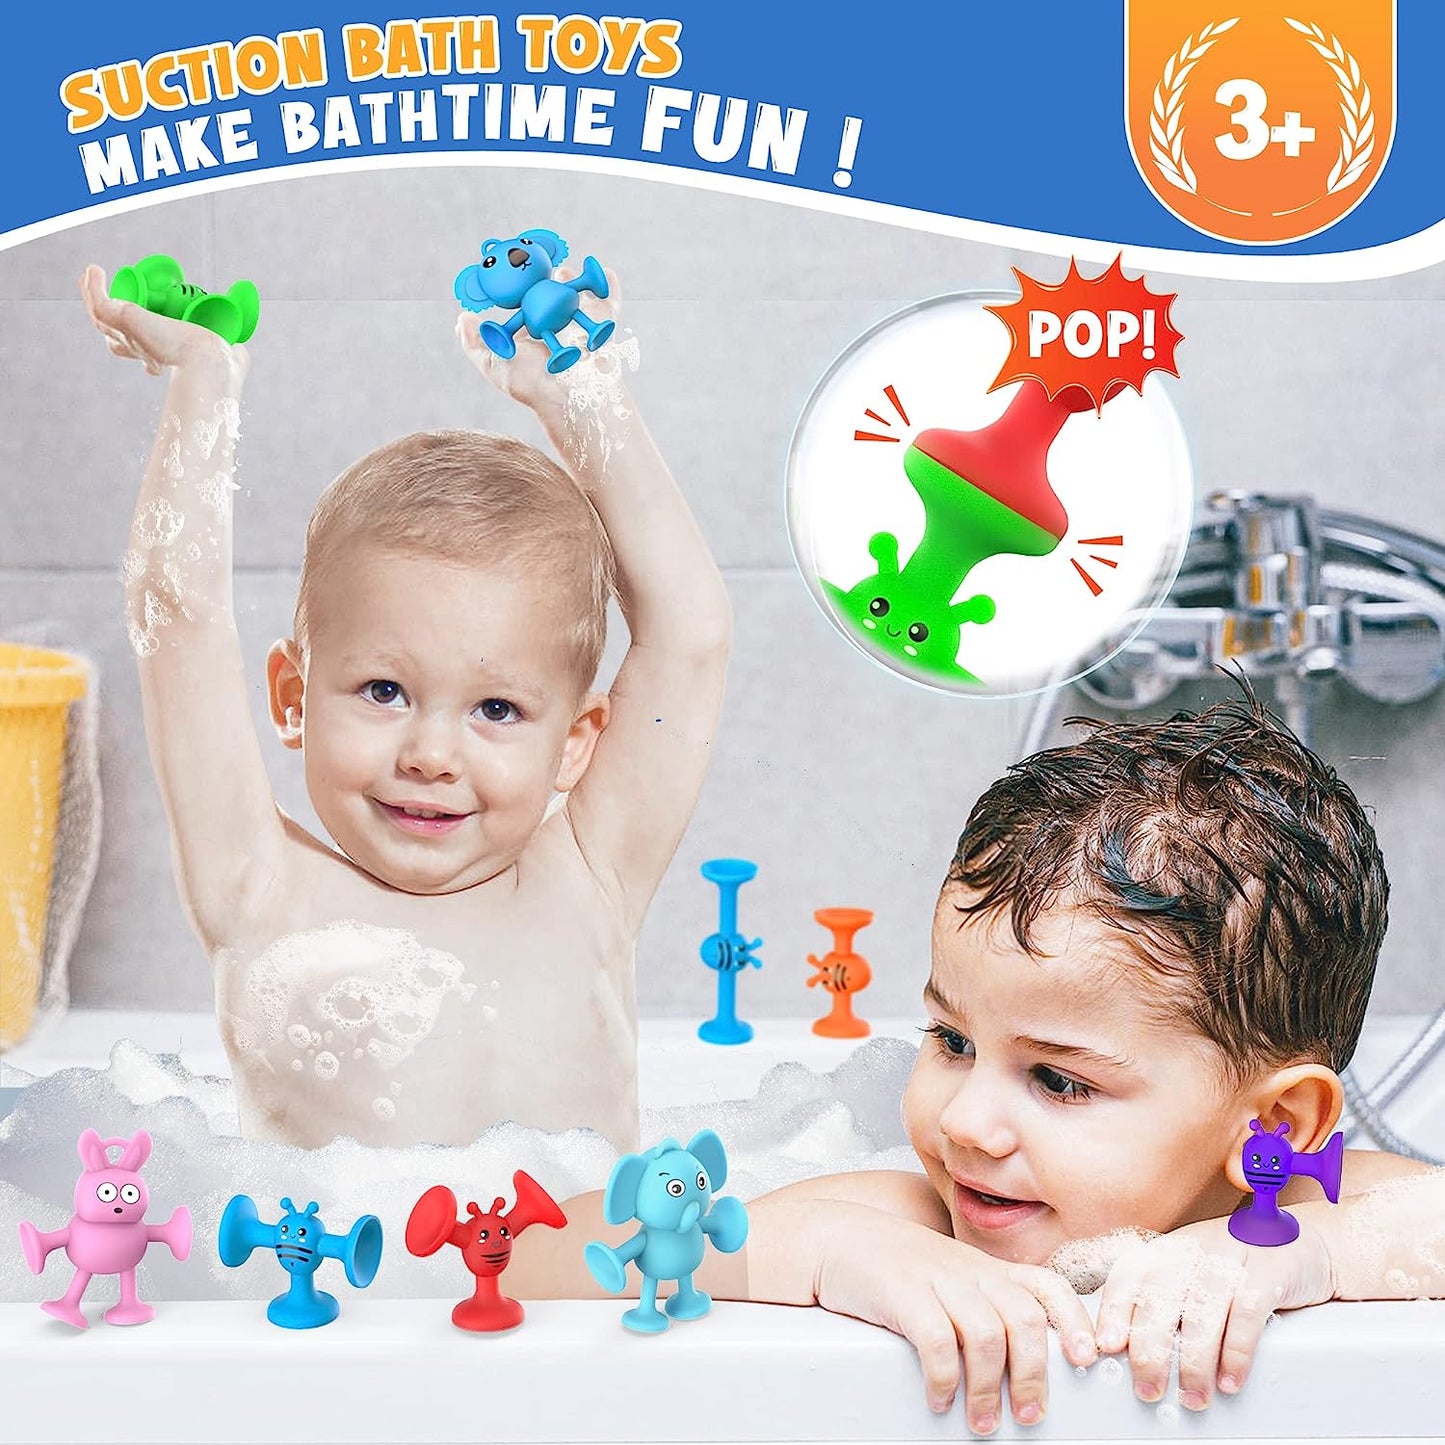 Suction Cup Toys for Kids, Suction Bath Toys for Toddlers Stacking Toys Shower Toys for Kids Ages 3+ Boys Girls, Bathtub Toys Sensory Toys Travel Toys with Dinosaur Eggshell Storage,19 PCS